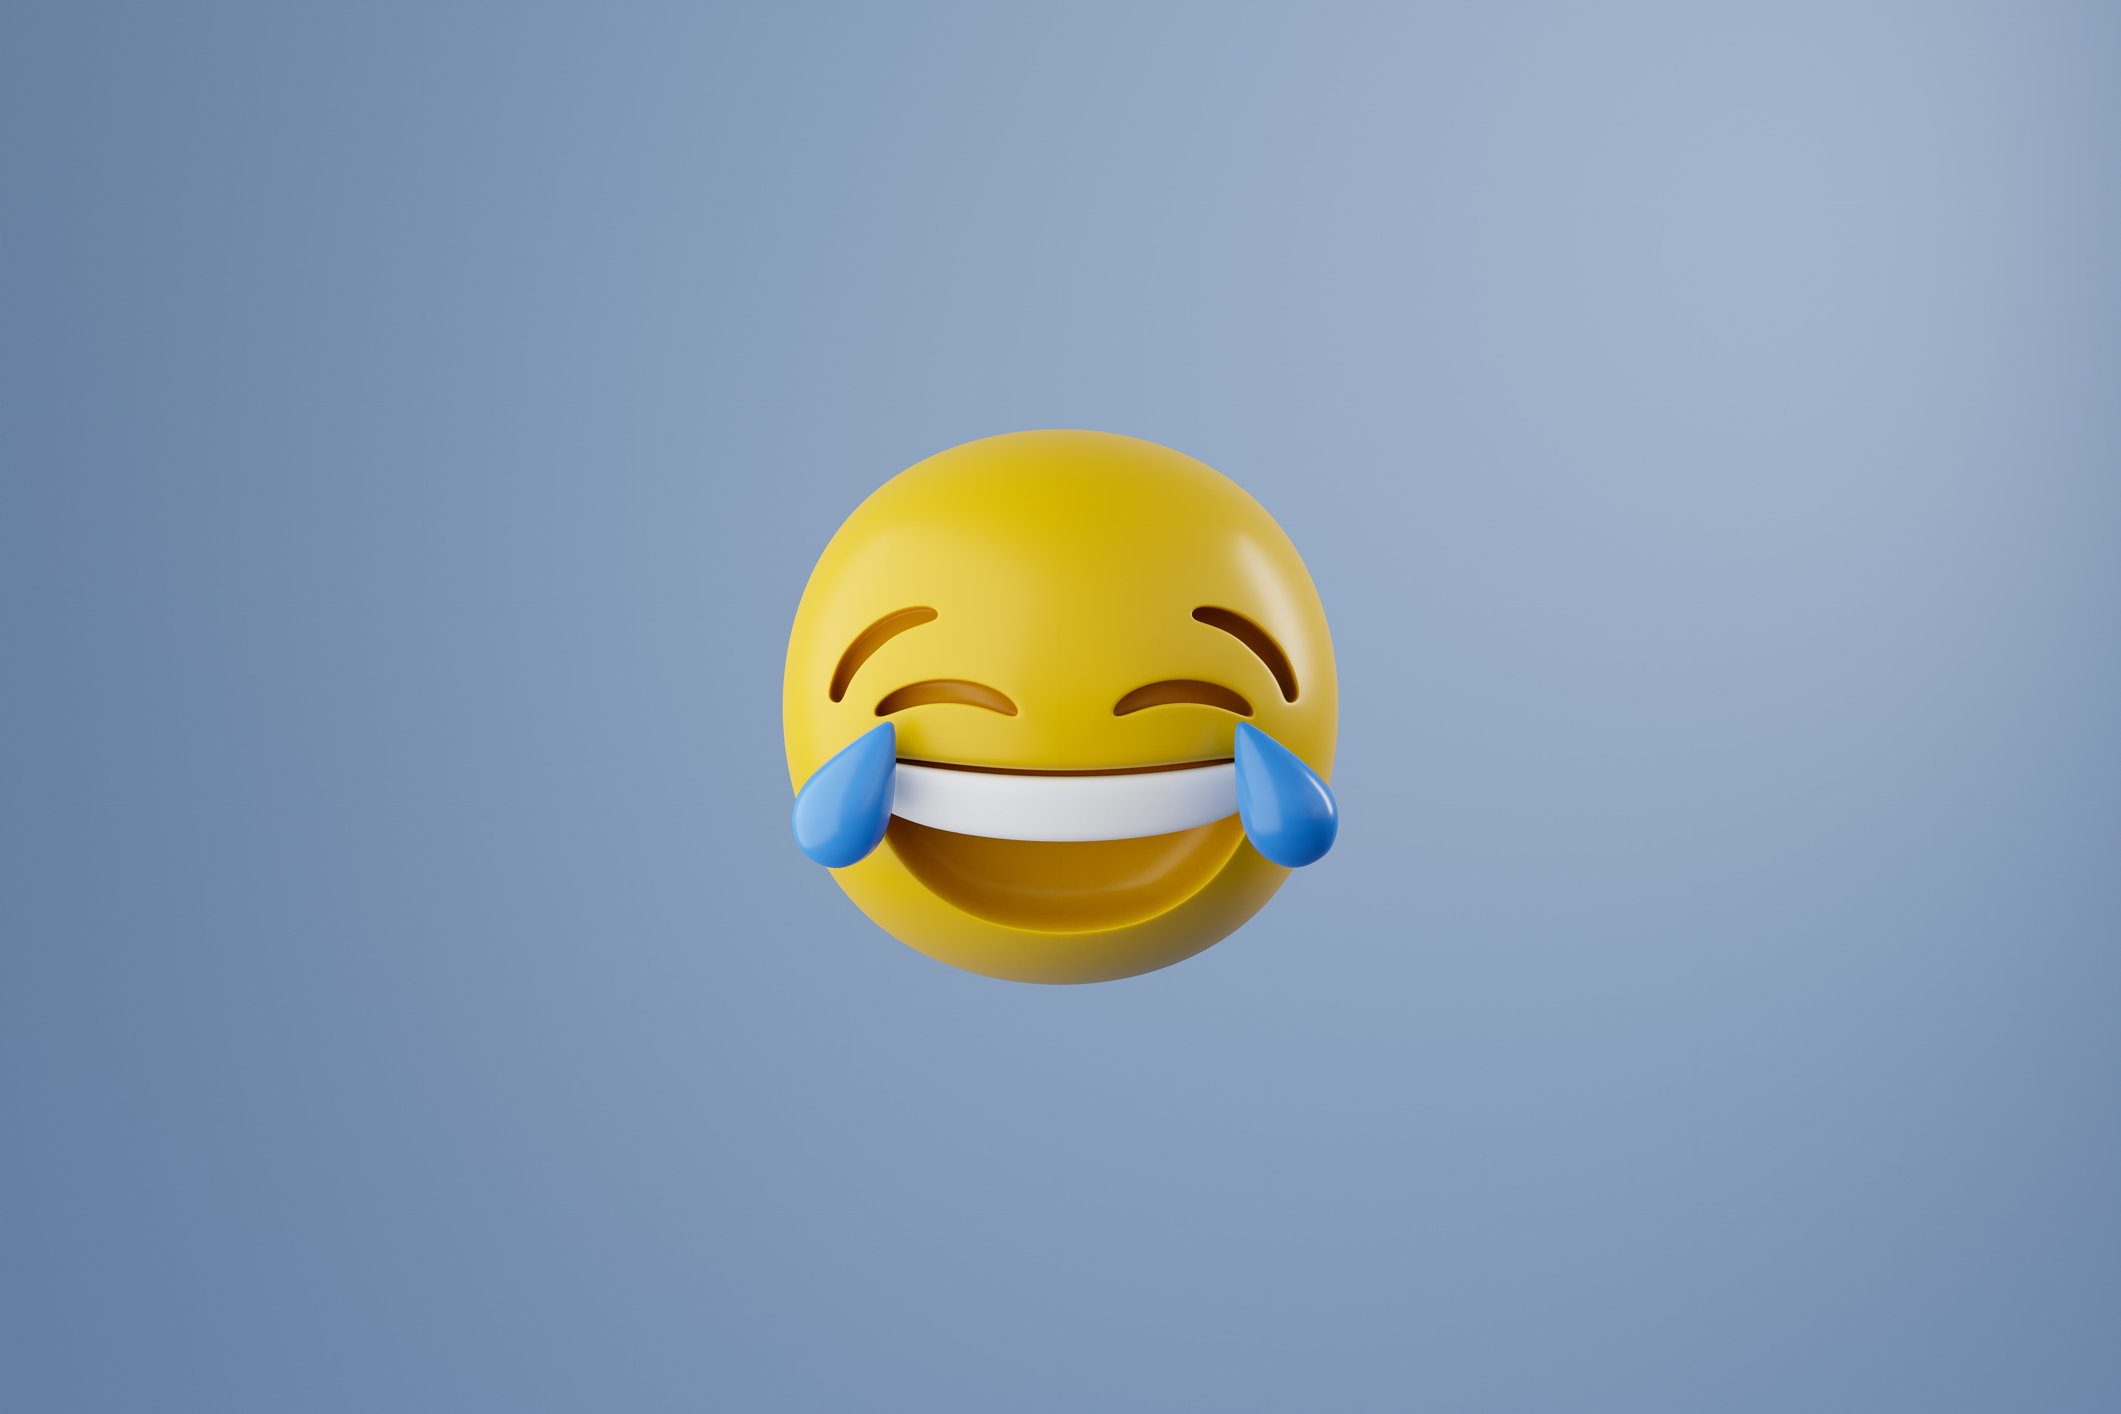 Laughing face emoticon with big blue tears at eyes